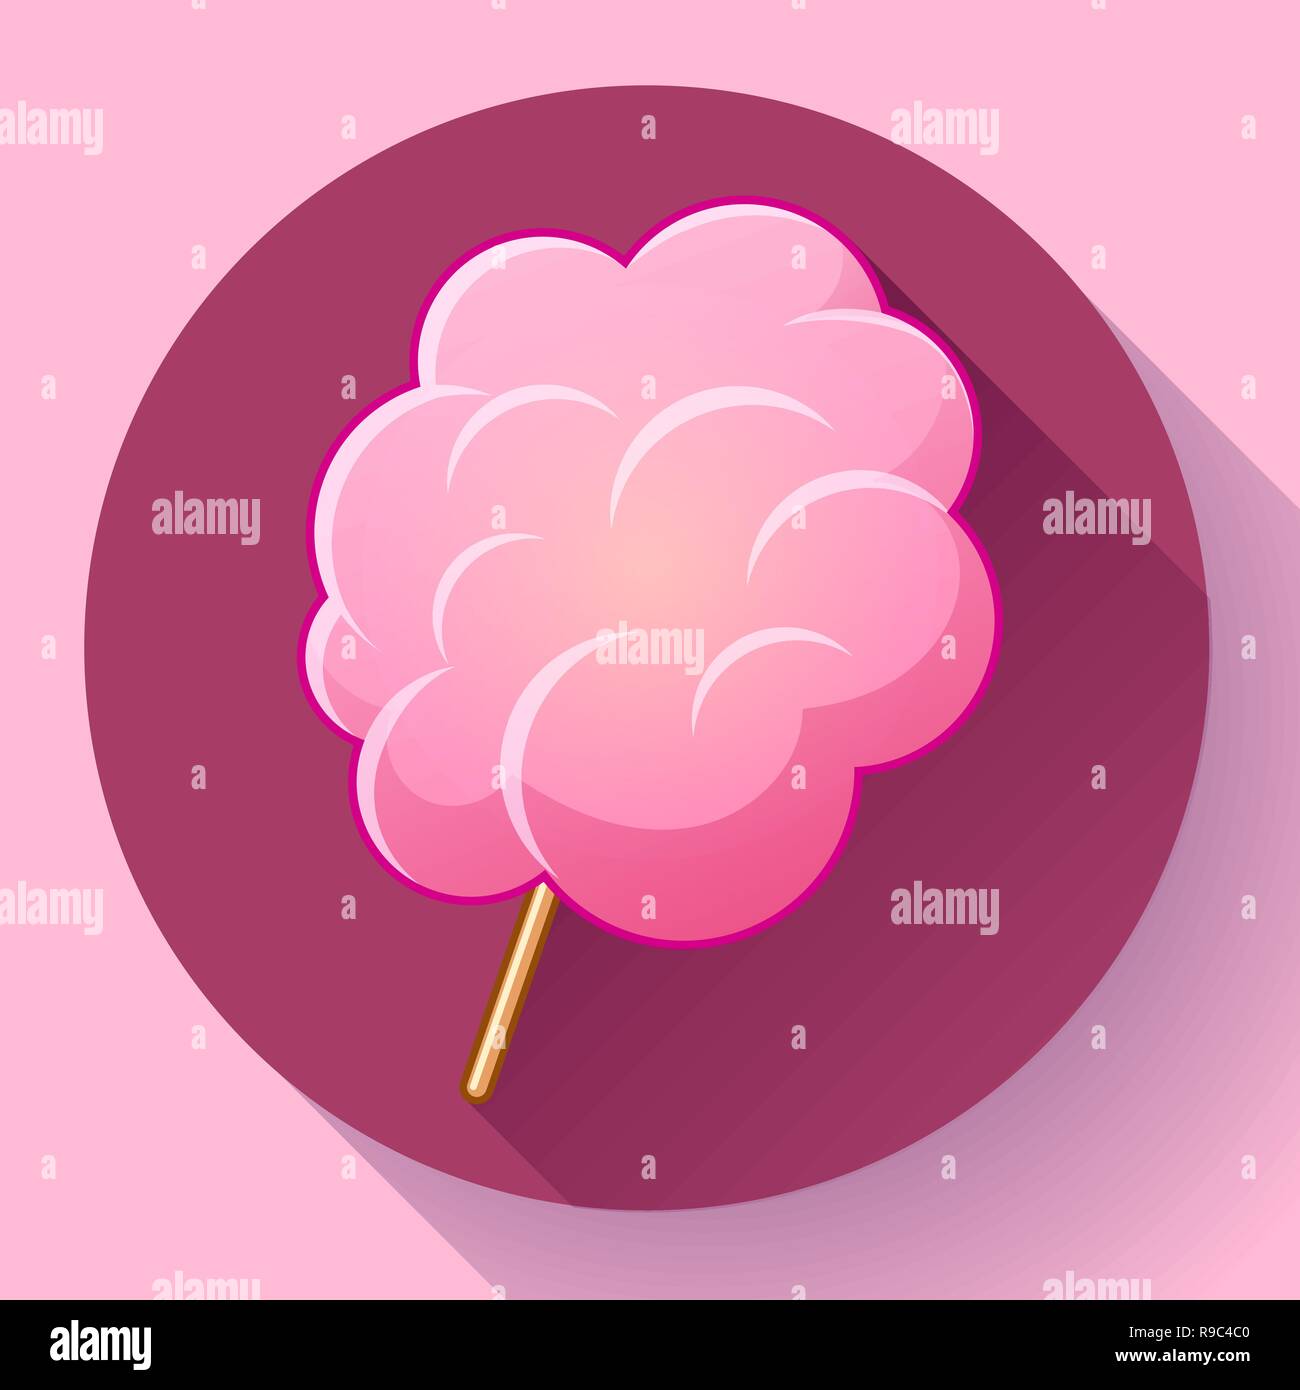 Icon of cotton candy, sugar cloud on stick isolated Stock Vector